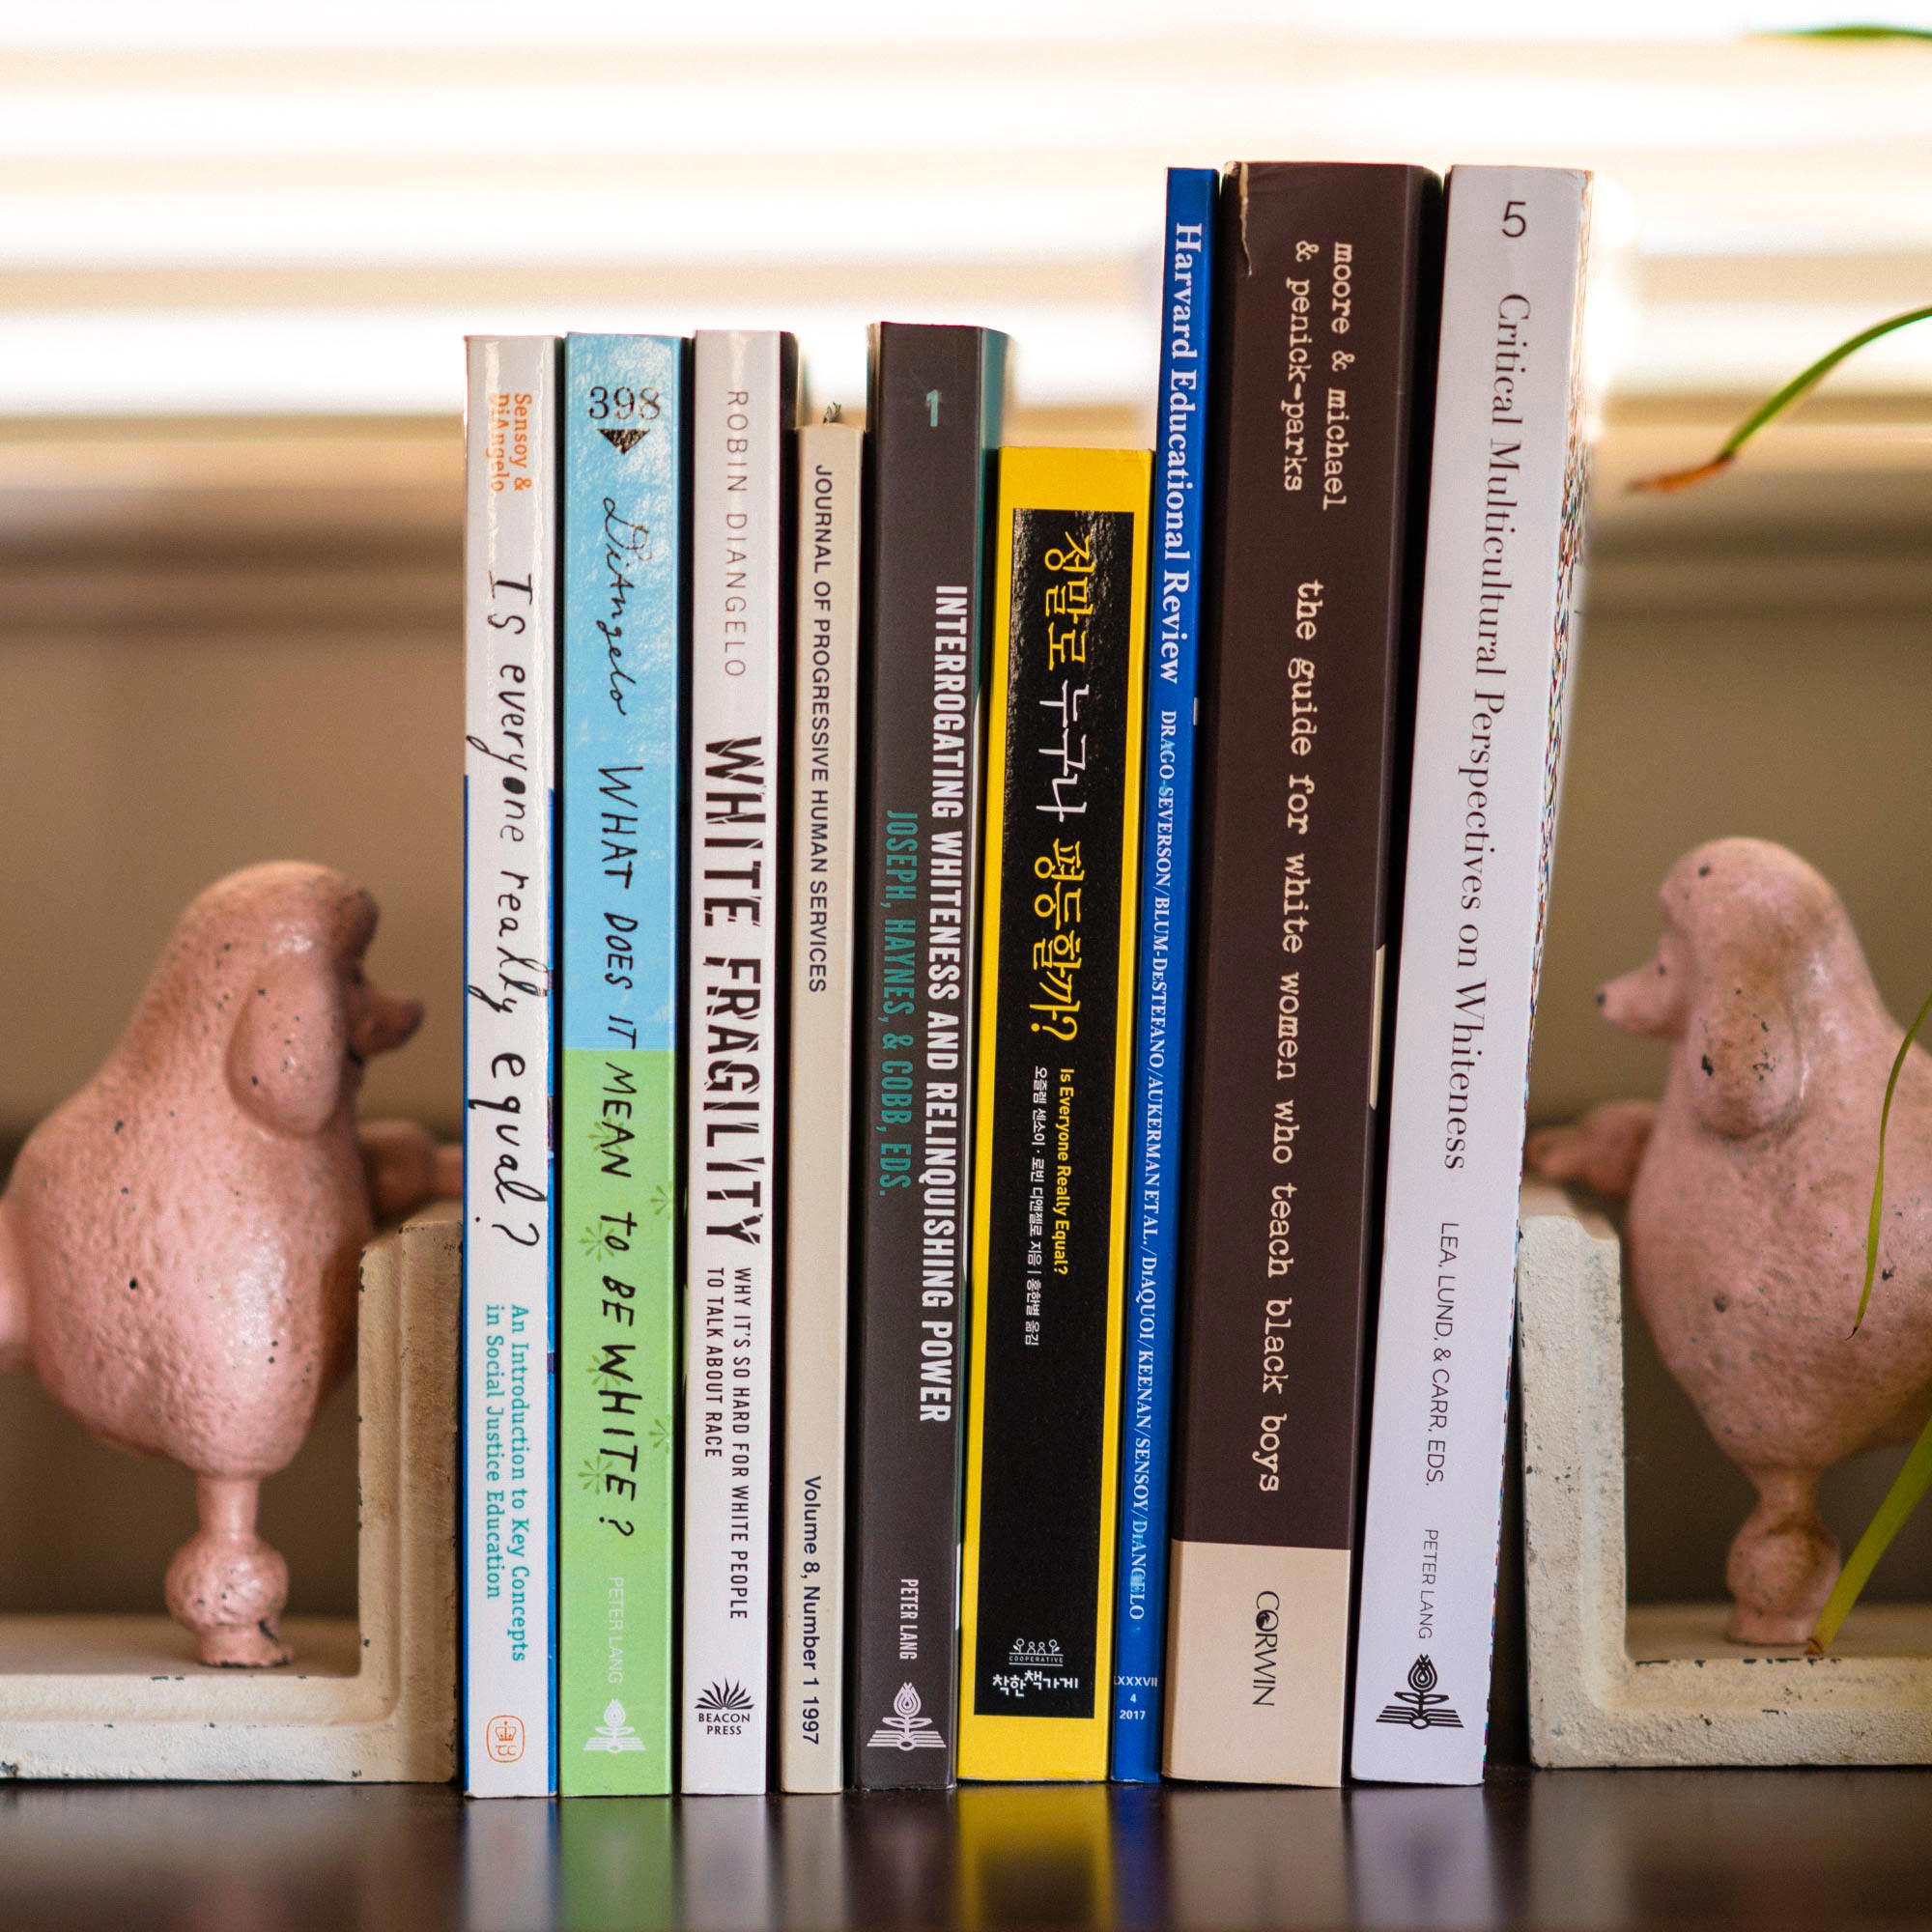 books in Robin DiAngelo's home: "Is Everyone Really Equal?"; "What Does It Mean to Be White?"; "White Fragility"; "Critical Multicultural Perspectives on Whiteness," among others